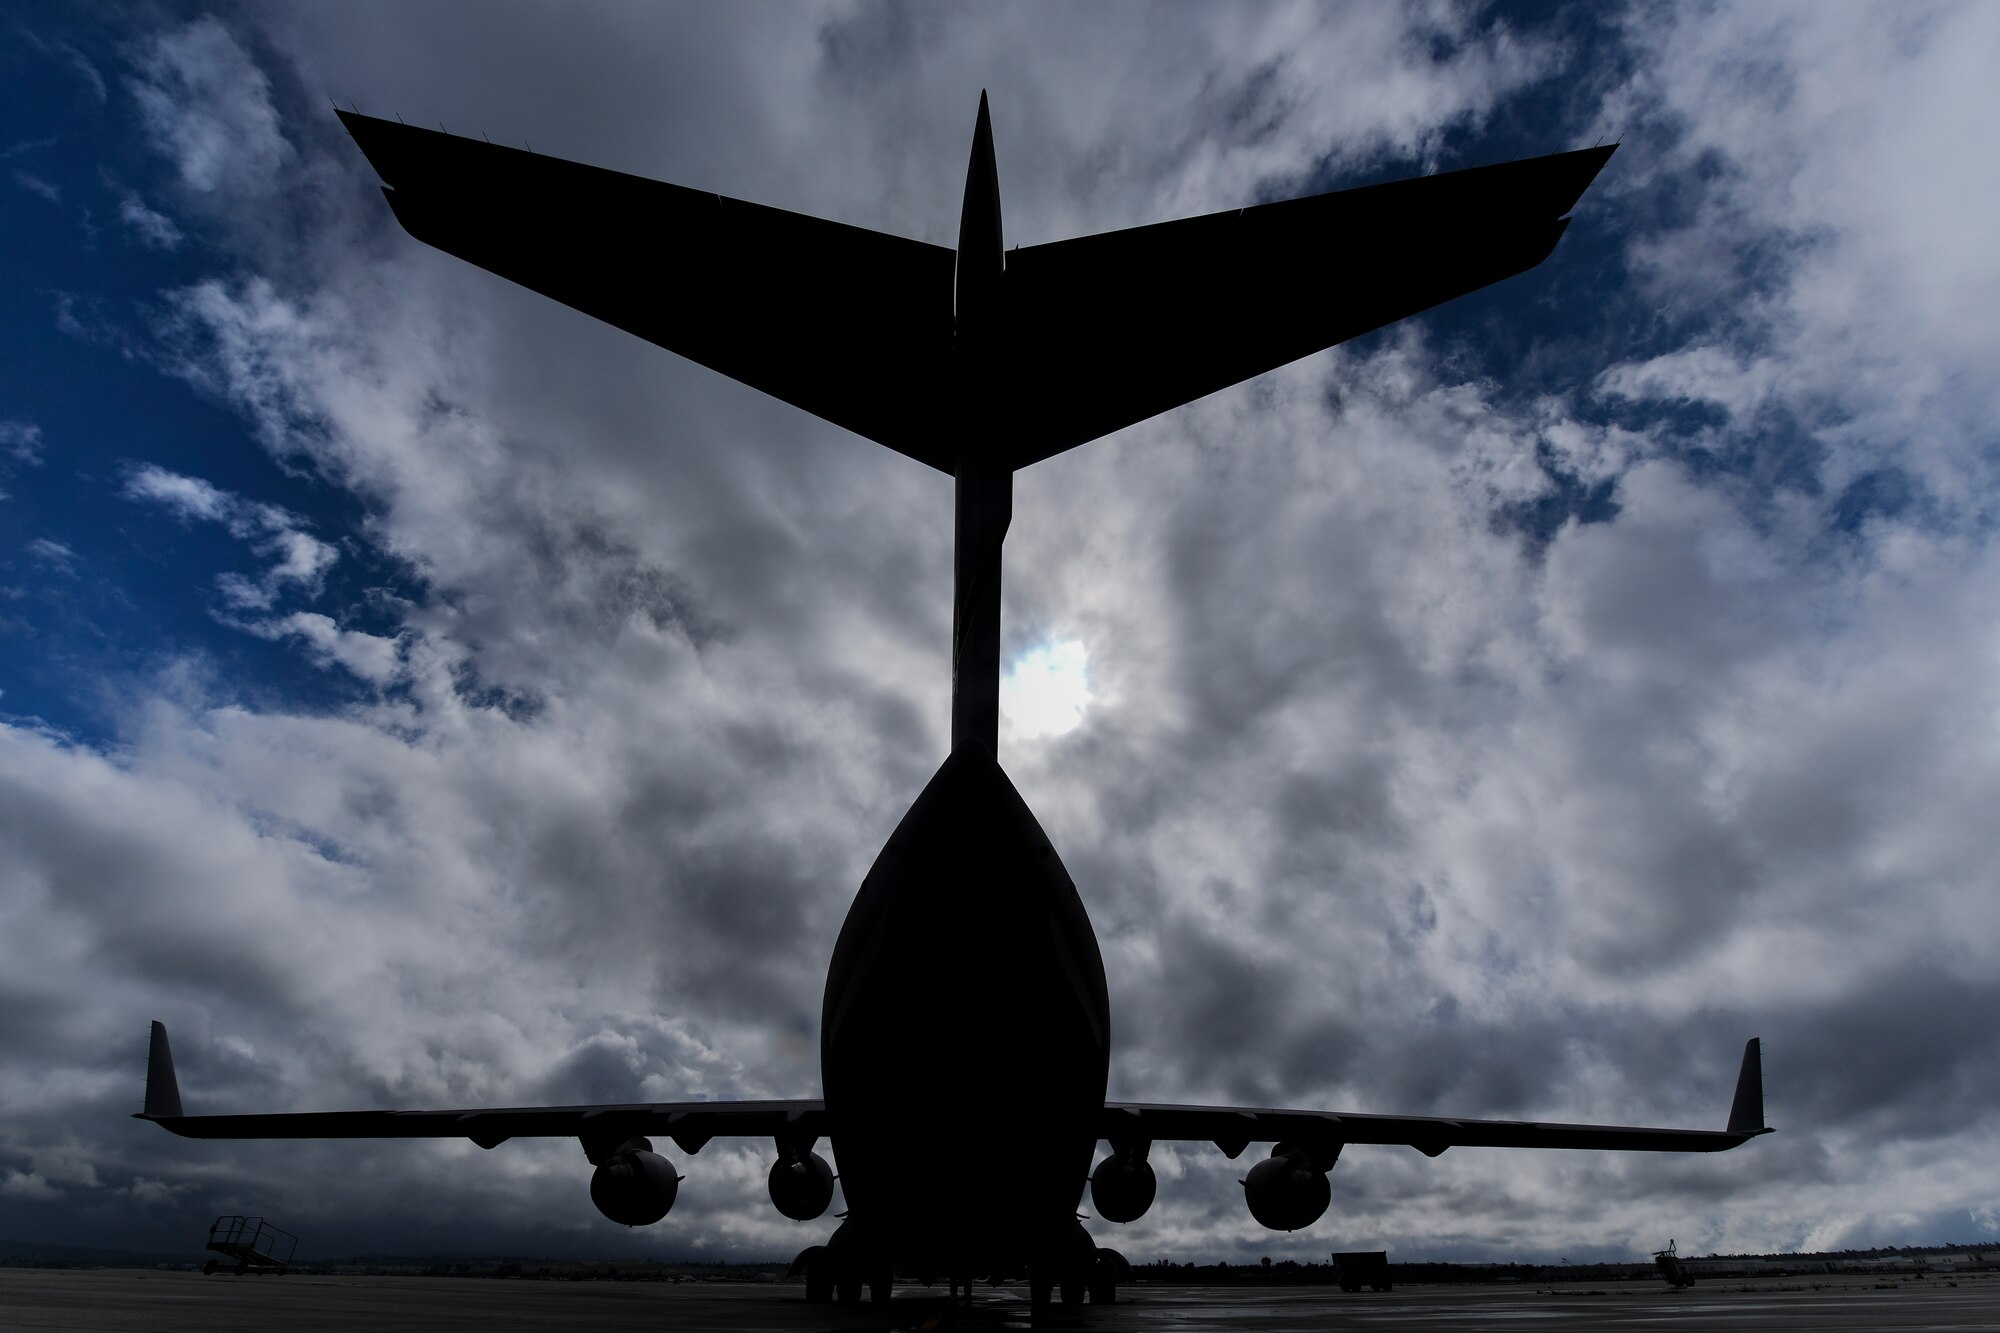 A C-17 Globemaster III assigned to the 911th Airlift Wing sits on the flightline at March Air Reserve Base, California, March 6, 2018. The C-17 Globemaster III is at at March ARB along with approximately 20 members from the 911th Maintenance Group due the flightline and aircraft conversion their home station is currently undergoing. (U.S. Air Force photo by Joshua J. Seybert)